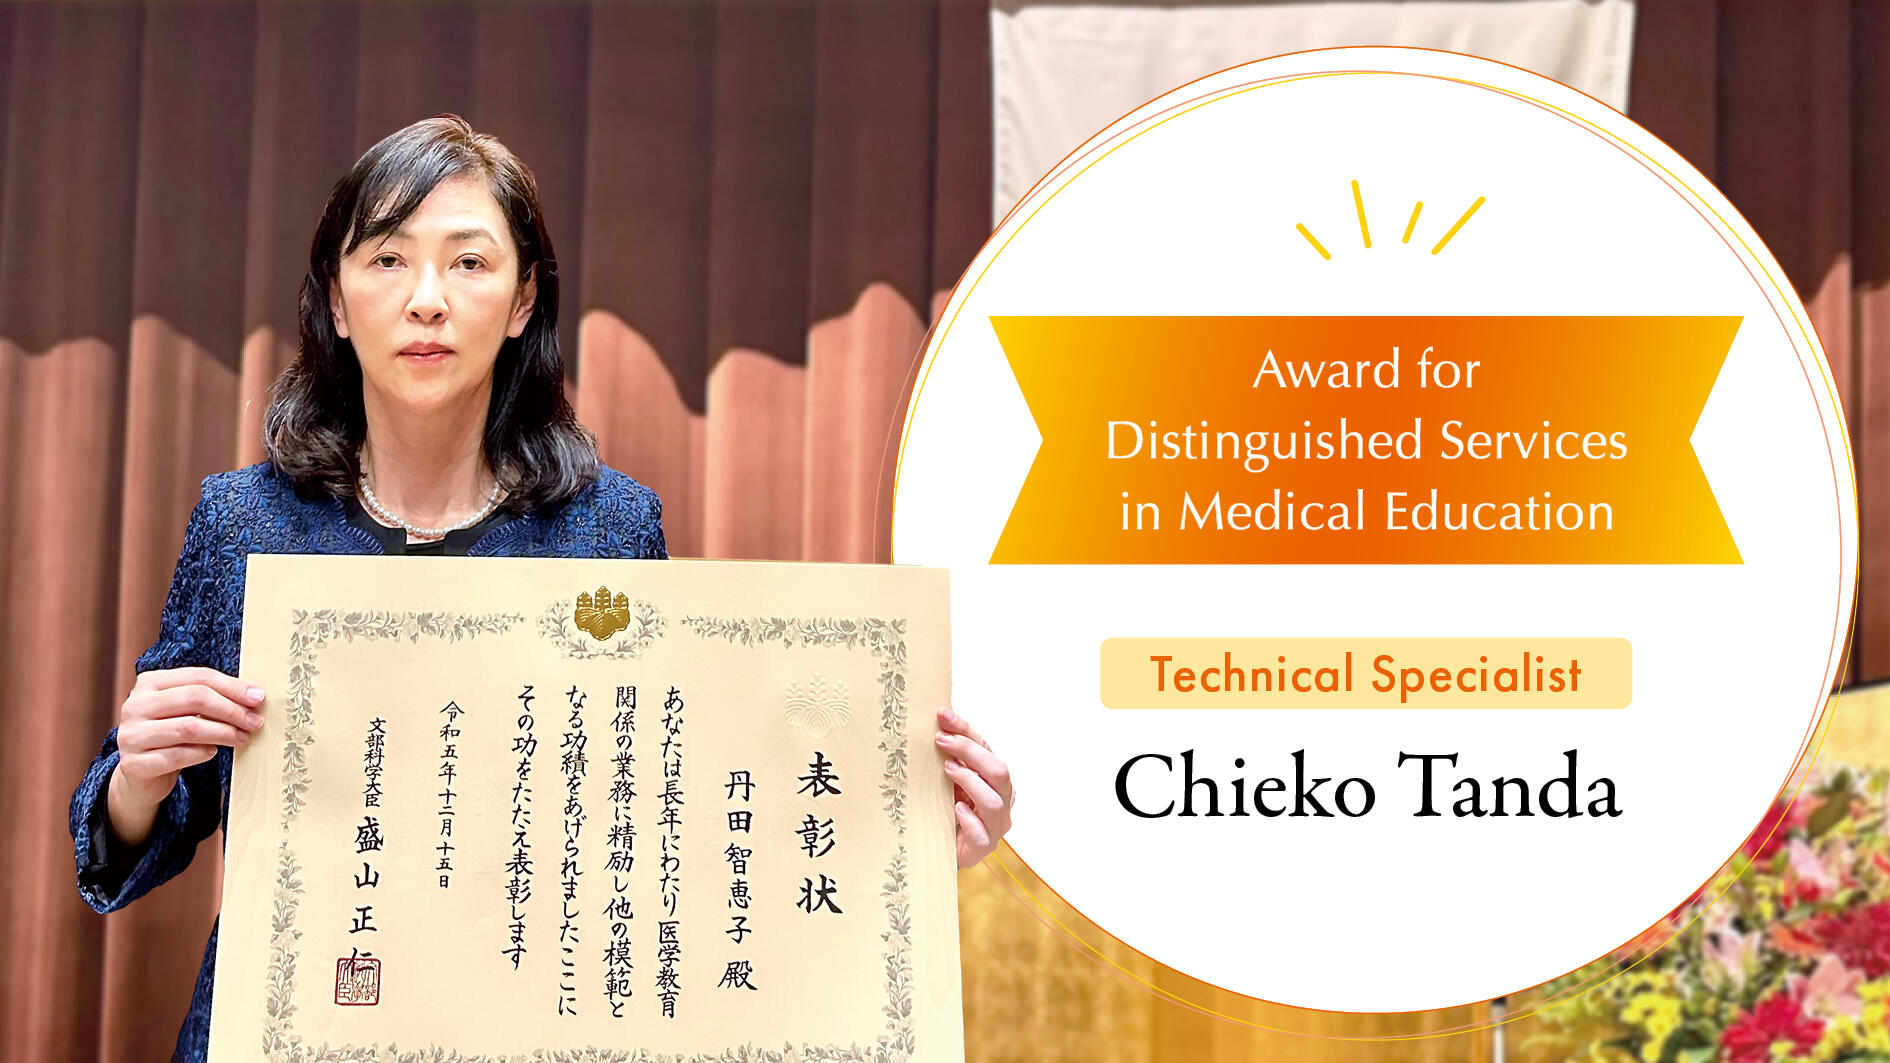 BRI technical specialist honored with prestigious 2023 Award for Distinguished Services in Medical Education